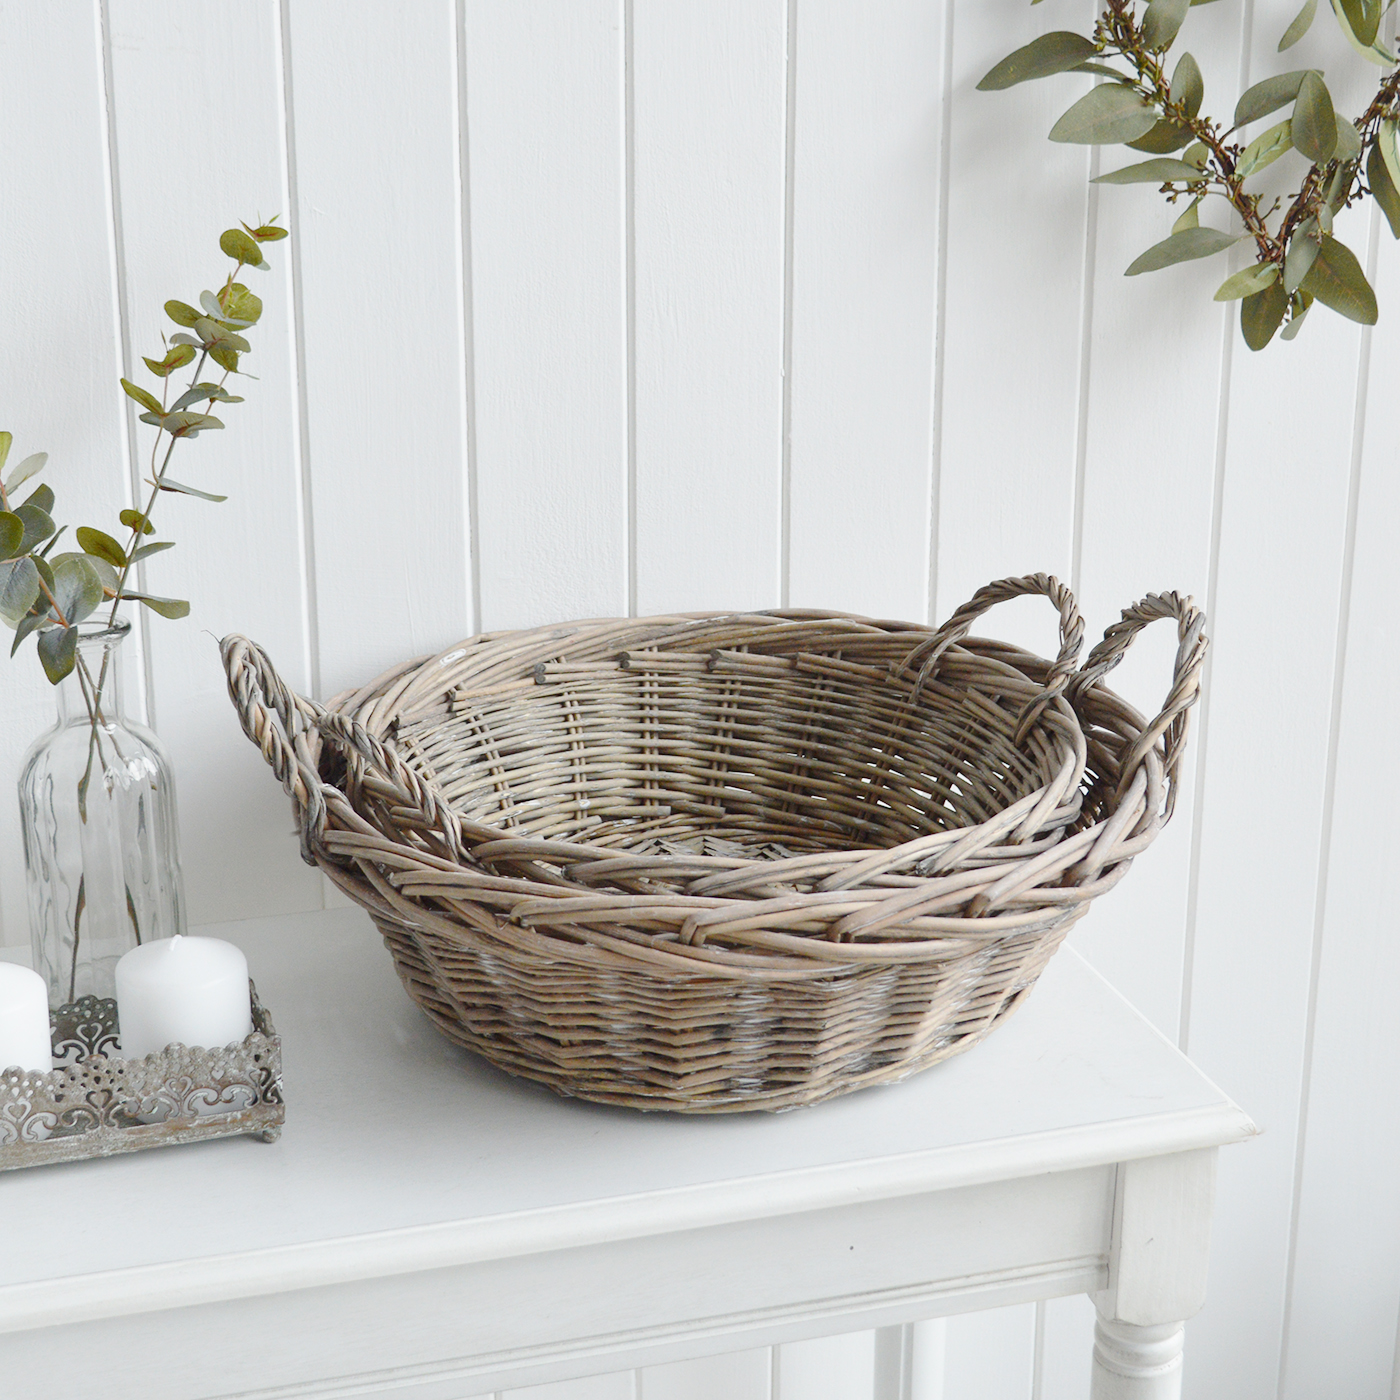 White Furniture and accessories for the home. Set Grey Wicker Baskets for New England style interiors for country, coastal, city homes